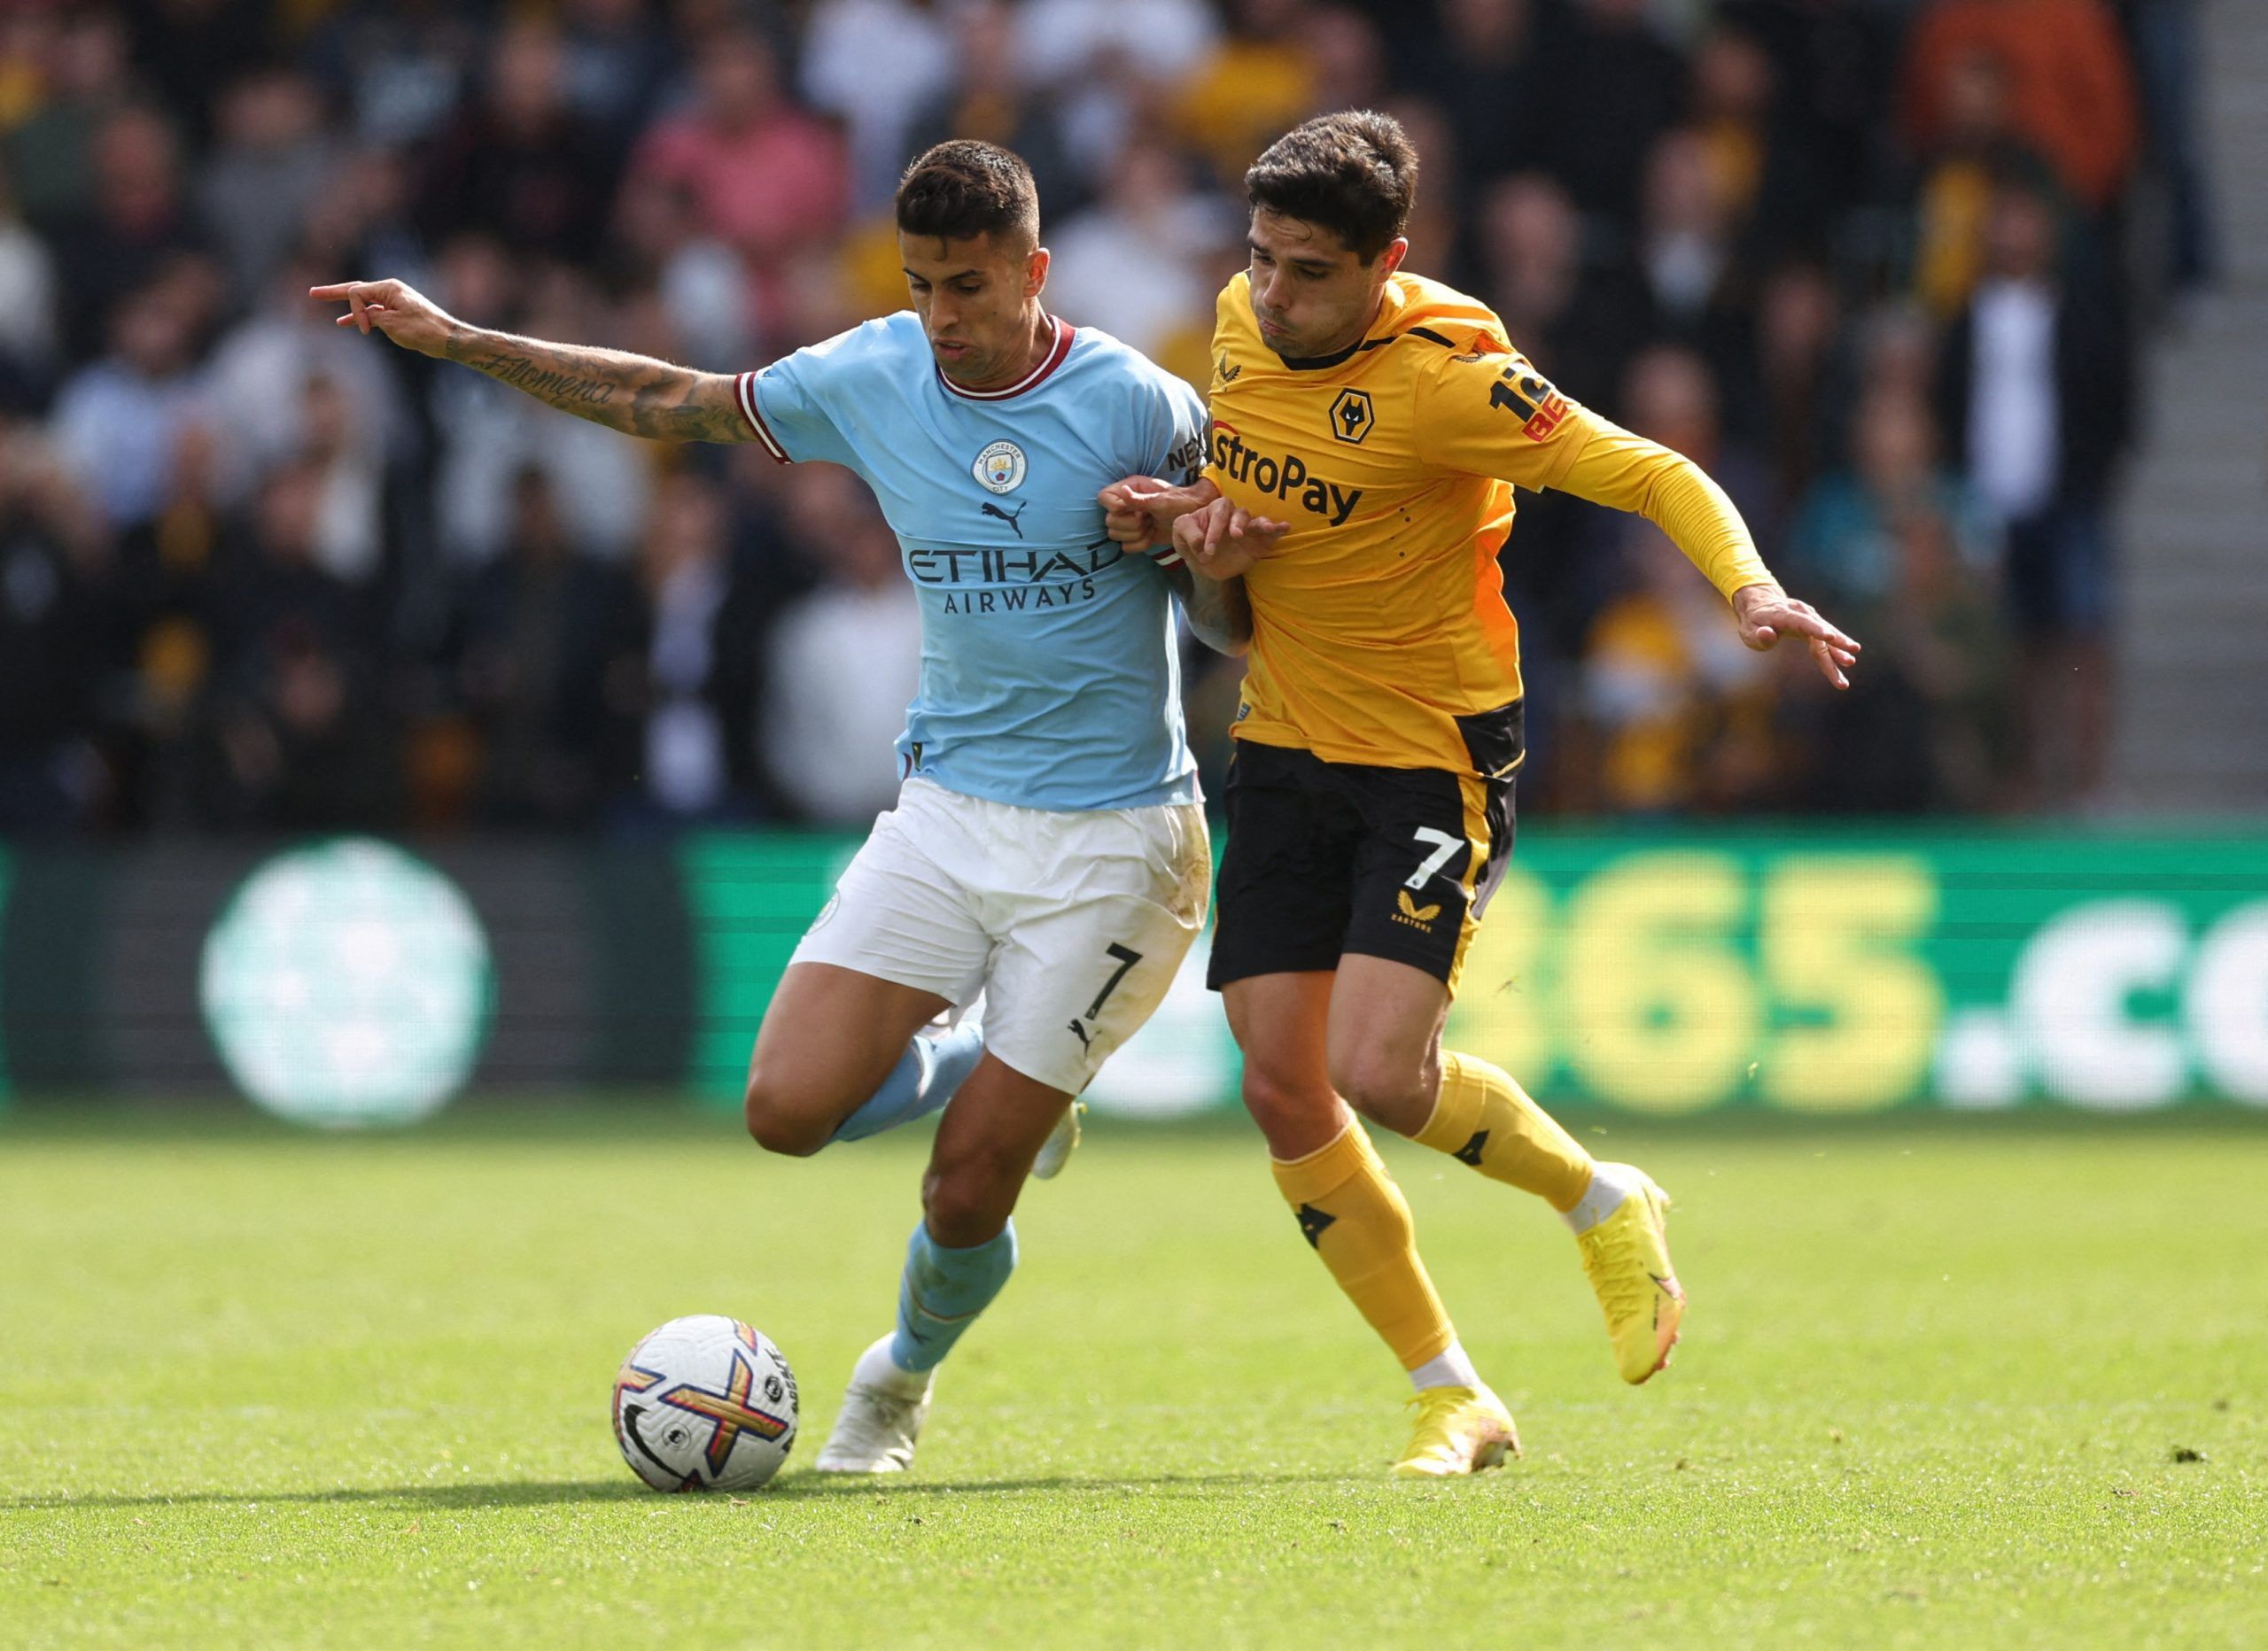 Soccer Football - Premier League - Wolverhampton Wanderers v Manchester City - Molineux Stadium, Wolverhampton, Britain - September 17, 2022 Wolverhampton Wanderers' Pedro Neto in action with Manchester City's Joao Cancelo Action Images via Reuters/Carl Recine EDITORIAL USE ONLY. No use with unauthorized audio, video, data, fixture lists, club/league logos or 'live' services. Online in-match use limited to 75 images, no video emulation. No use in betting, games or single club /league/player publ